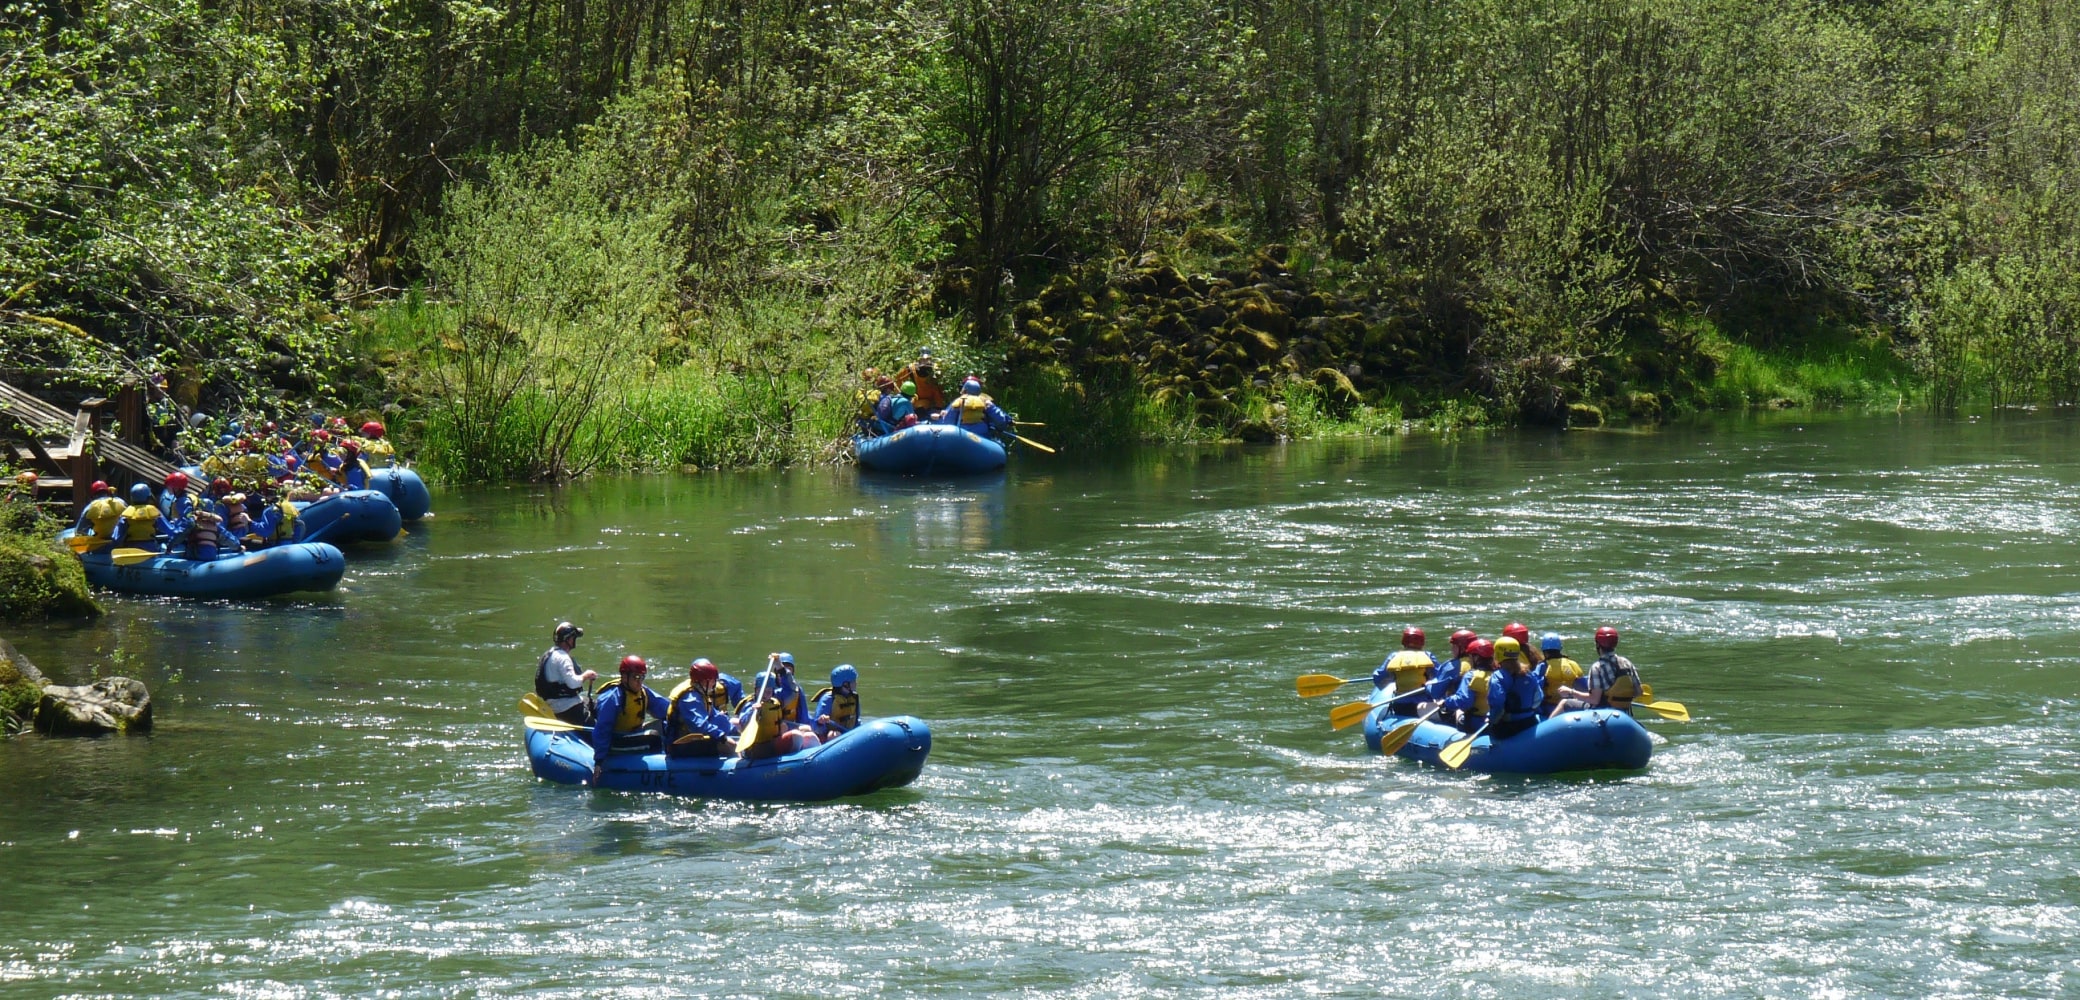 Six groups of white water rafters in blue rafts take a break along the Sandy River in Oregon.